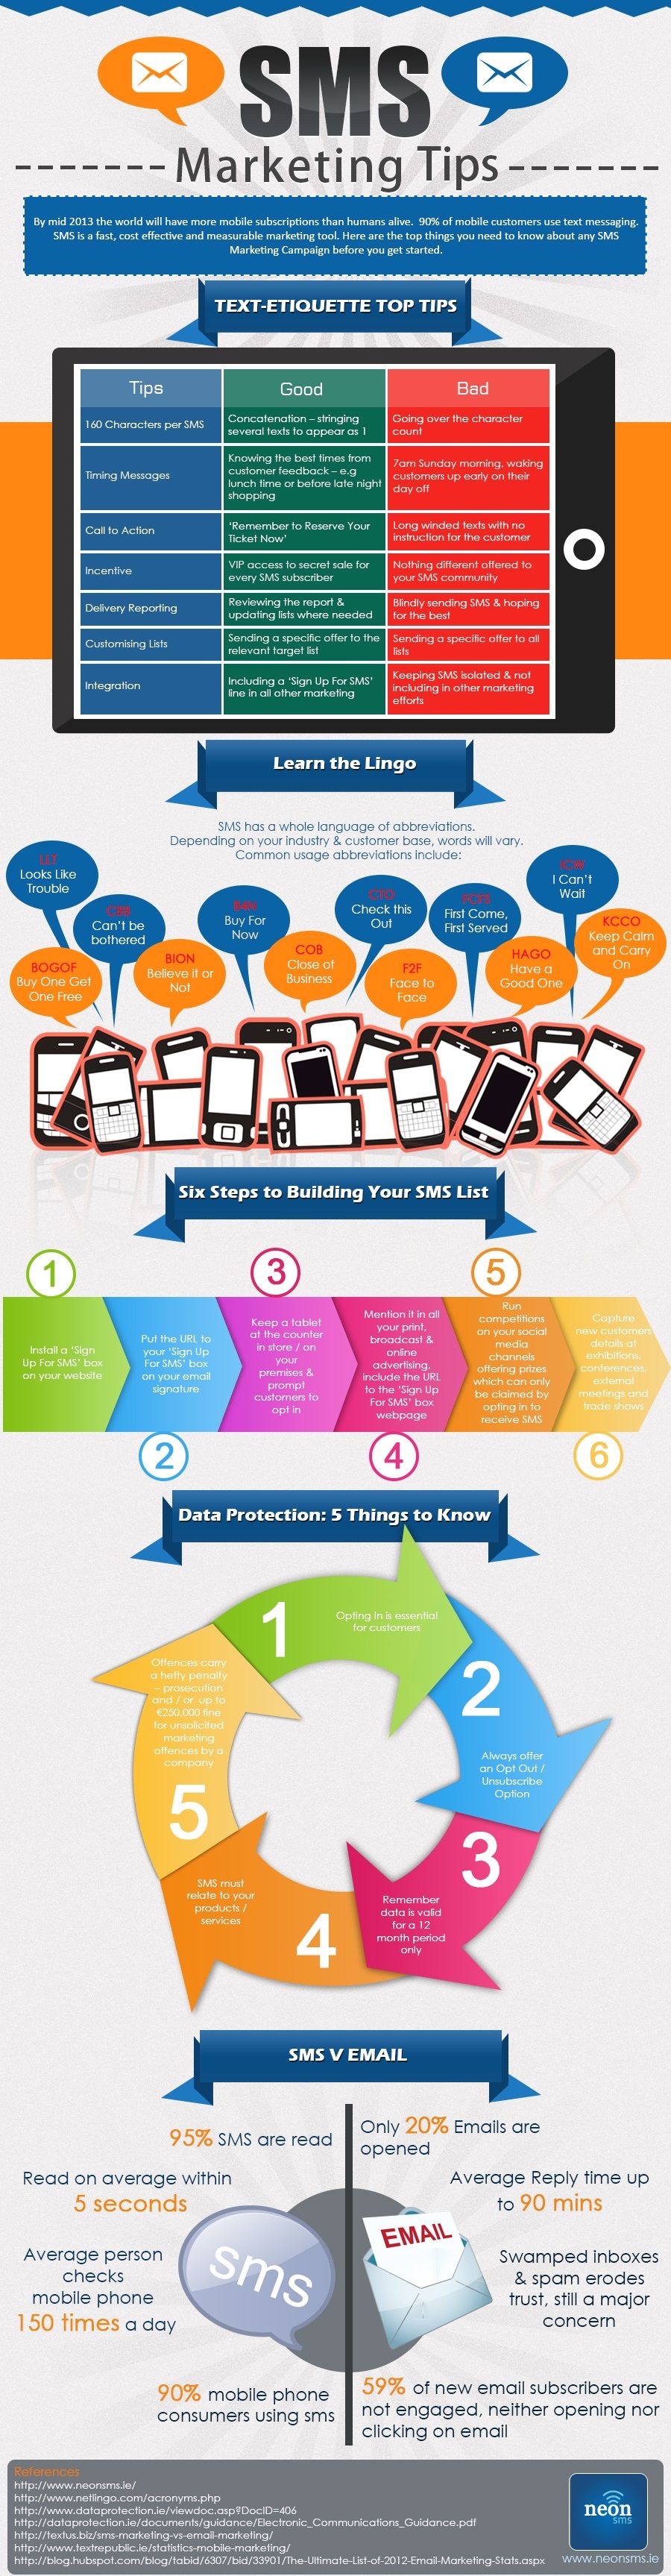 Infographic: SMS Marketing Tips